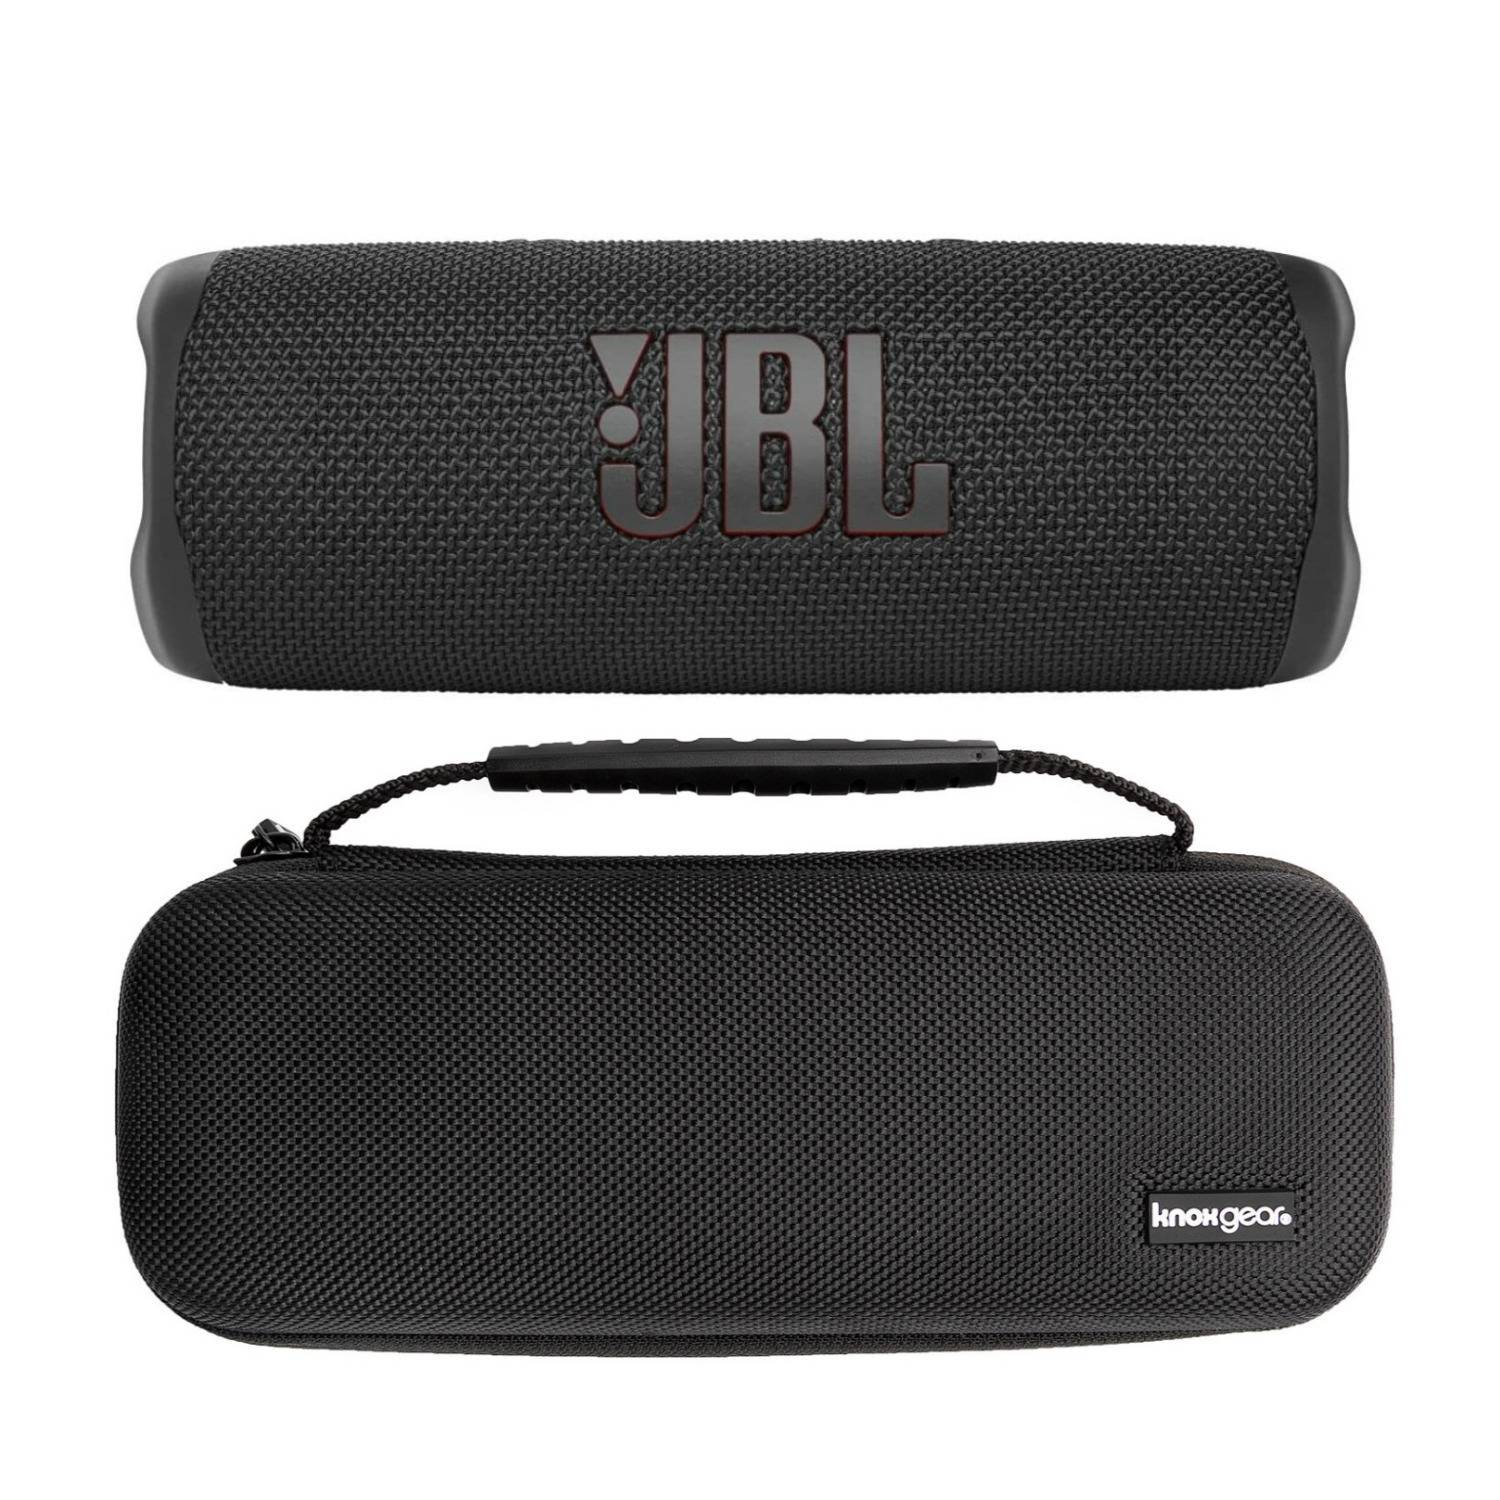 JBL Flip 6 Portable Waterproof Speaker (Black) with Knox Gear Hardshell Travel and Protective Case